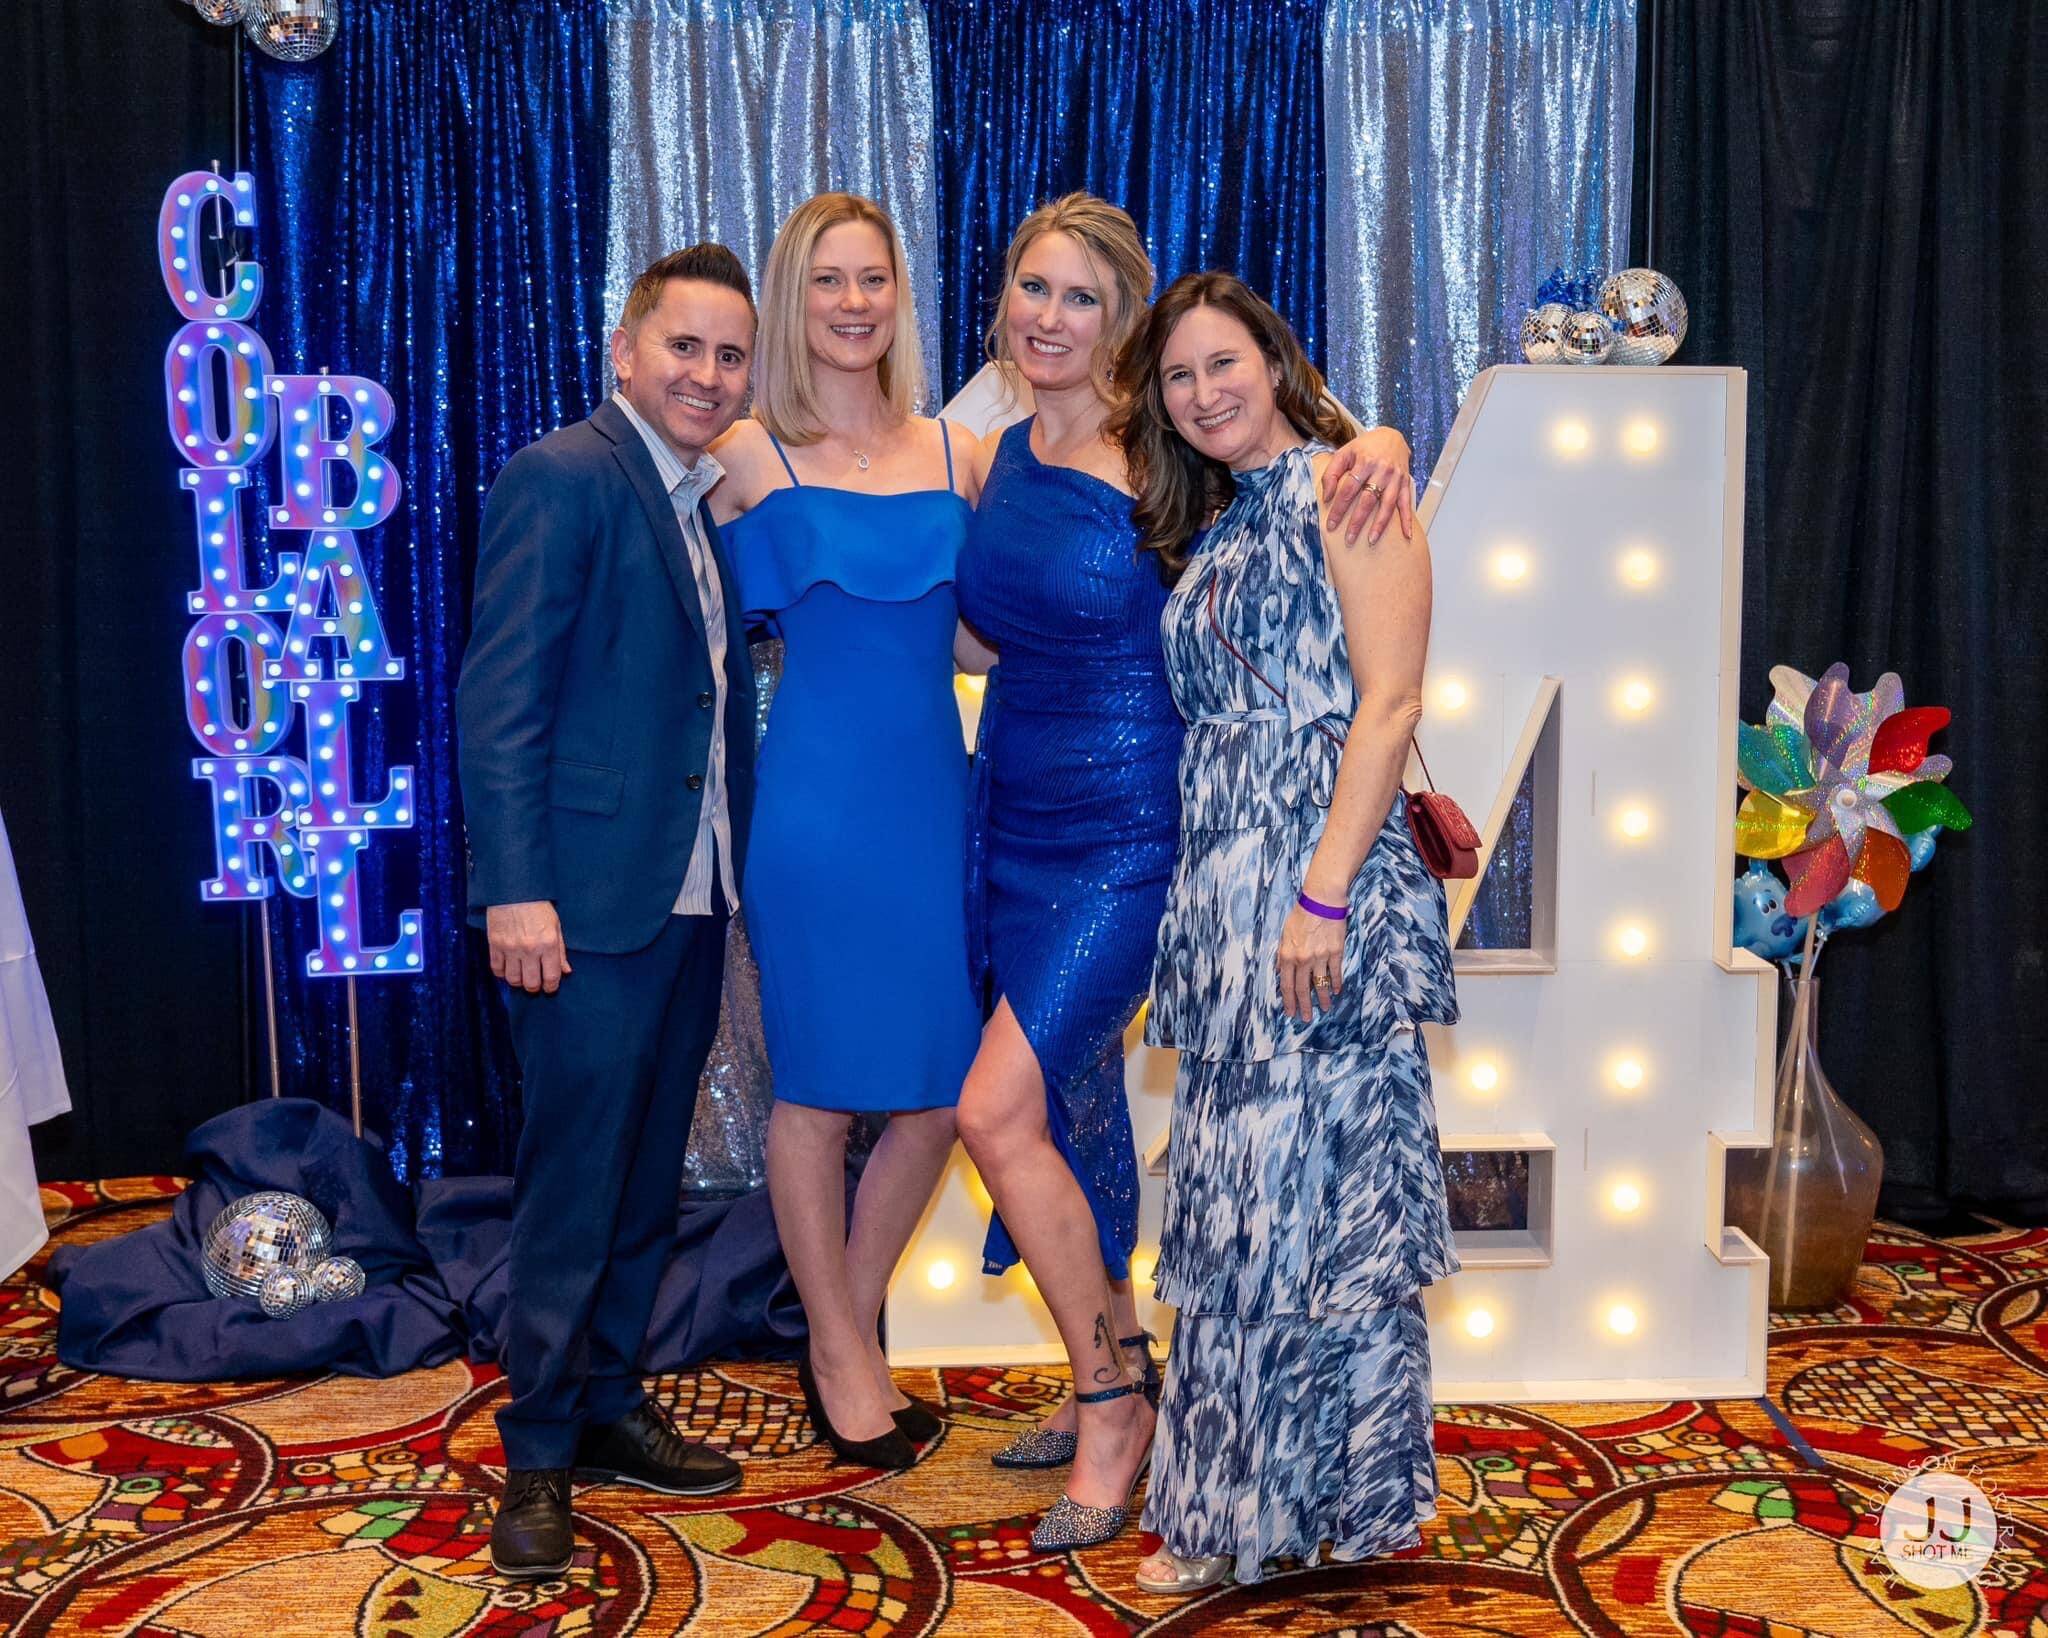 Pictured: The SnoValley Chamber of Commerce held its Color Ball 2024 on March 1. Photo by Jean Johnson